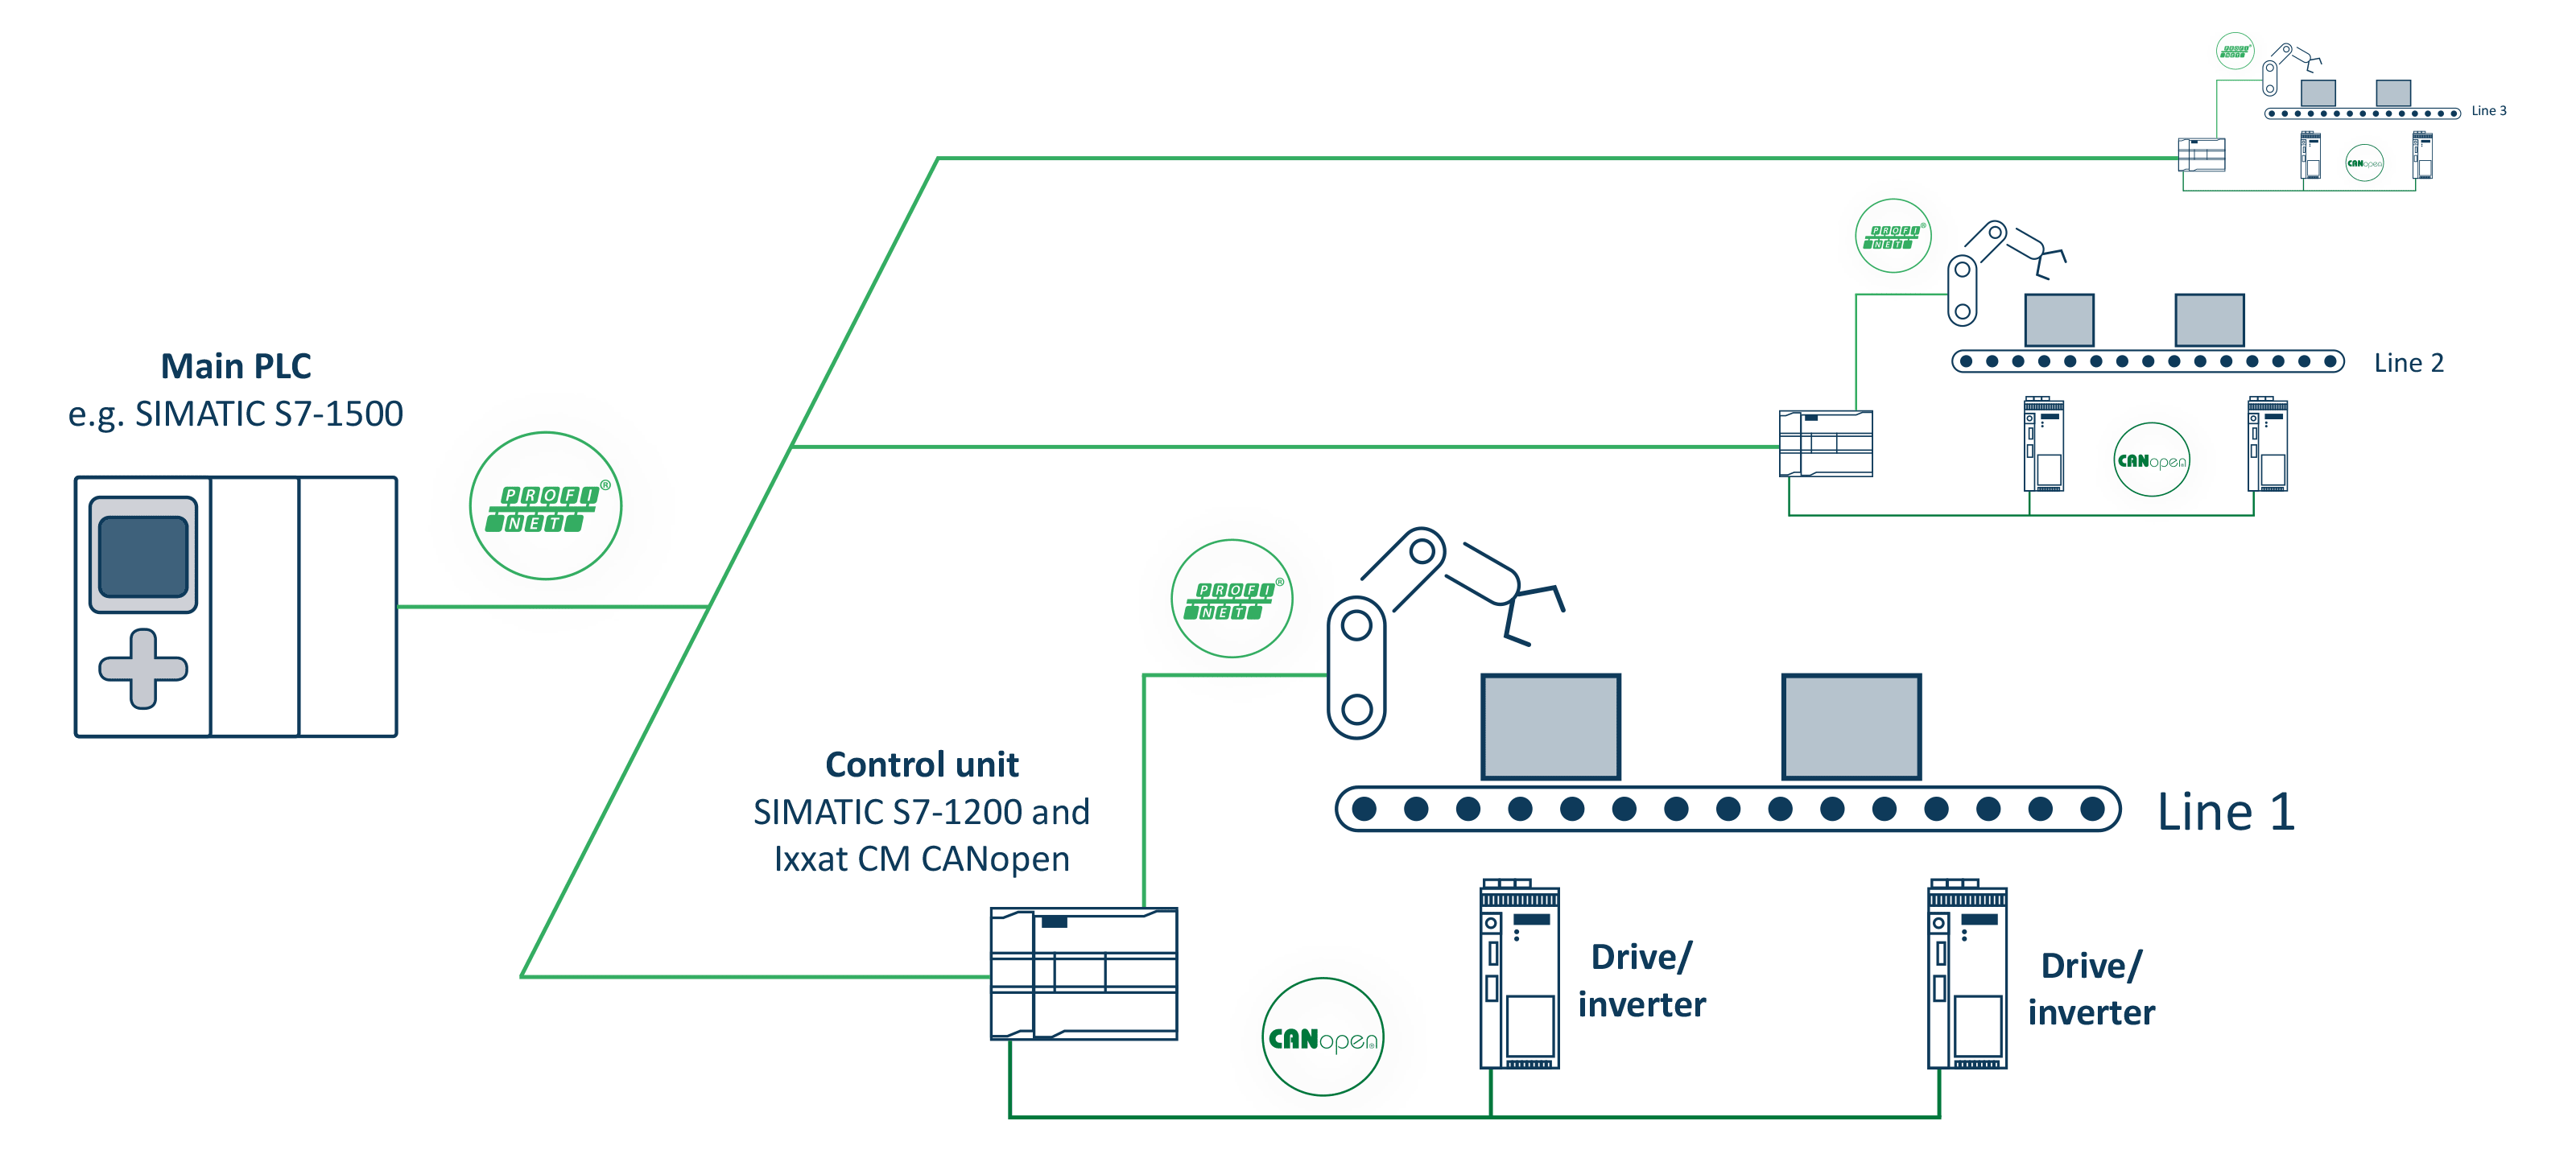 Integrating CANopen devices in a Siemens PROFINET PLC environment with  Ixxat CM CANopen